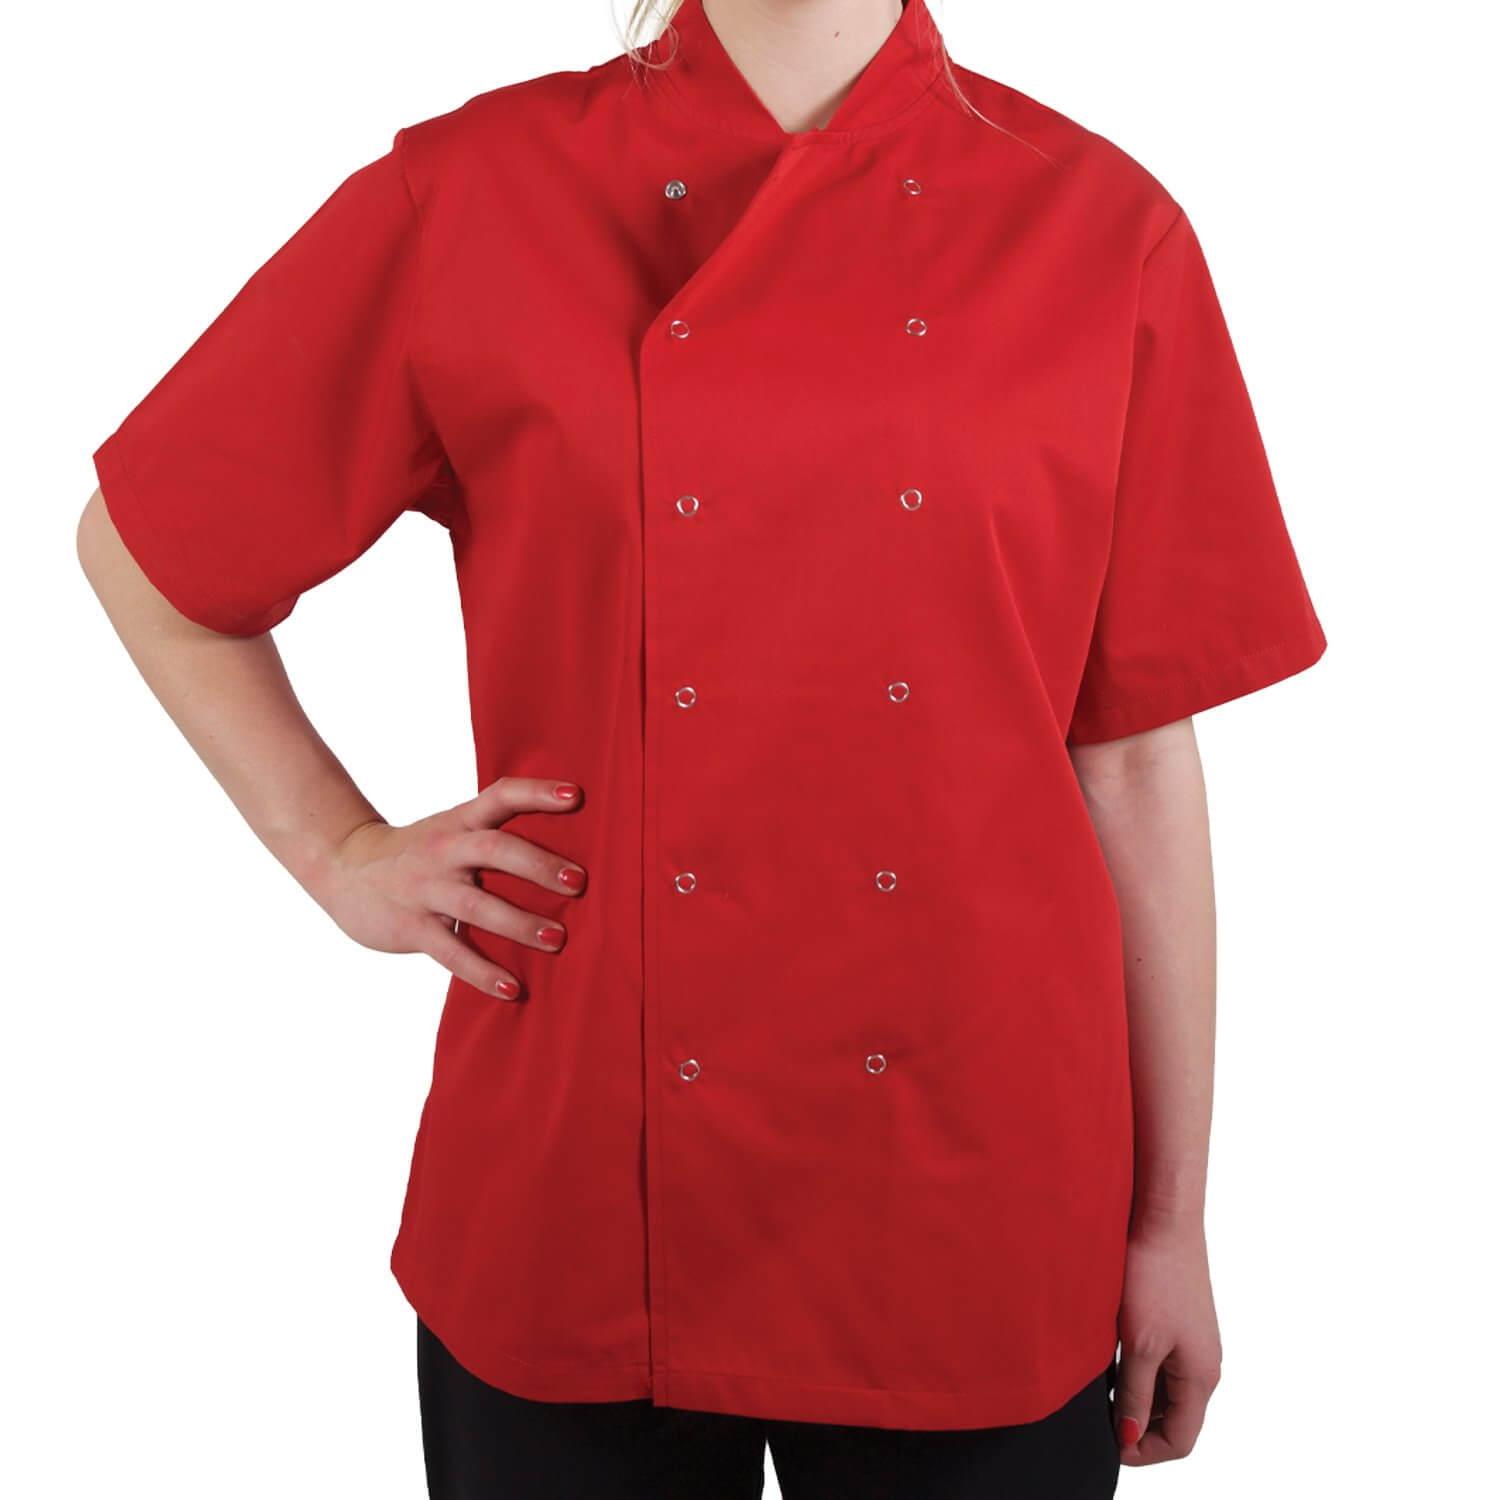 Pegasus Red Short Sleeve Chef Jackets with Press Studs